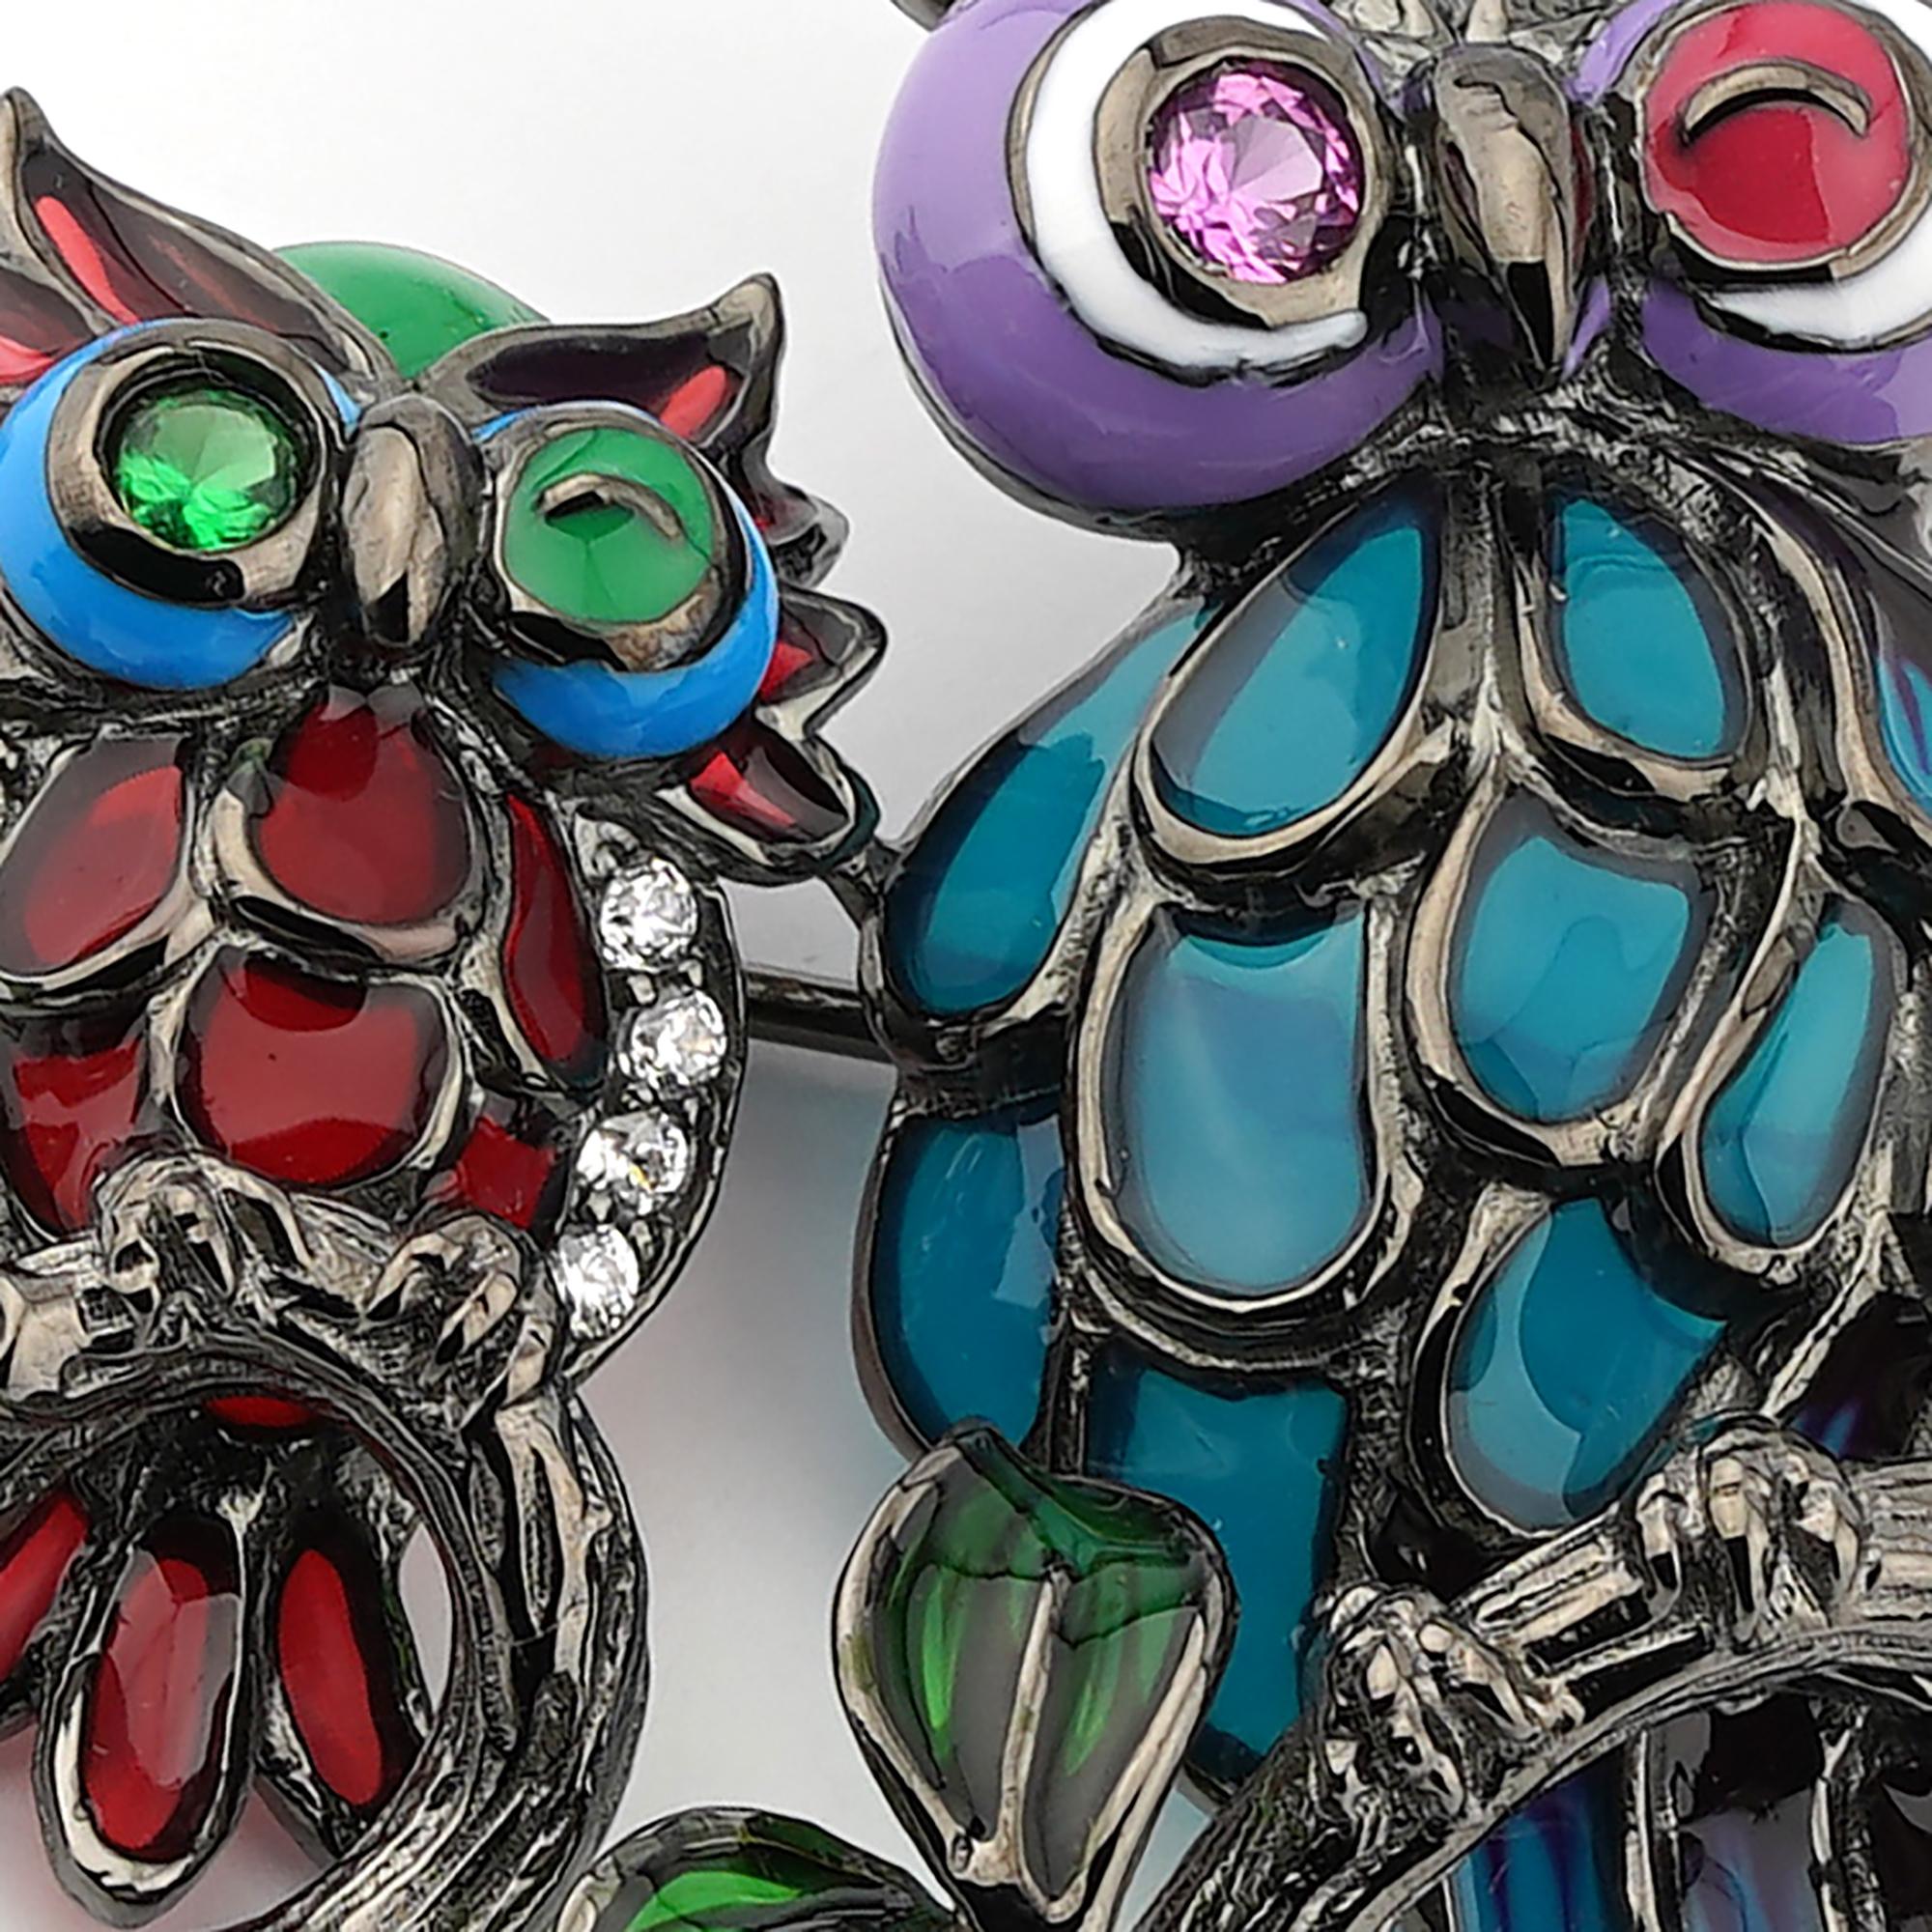 Black rhodium plated 925 sterling silver with enamels Owls shaped brooch. Elegant brooch made in 925 sterling silve plated with black rhodium and embellished with synthetic pink corundum stone and white zirconia depicting two owls on a branch . All